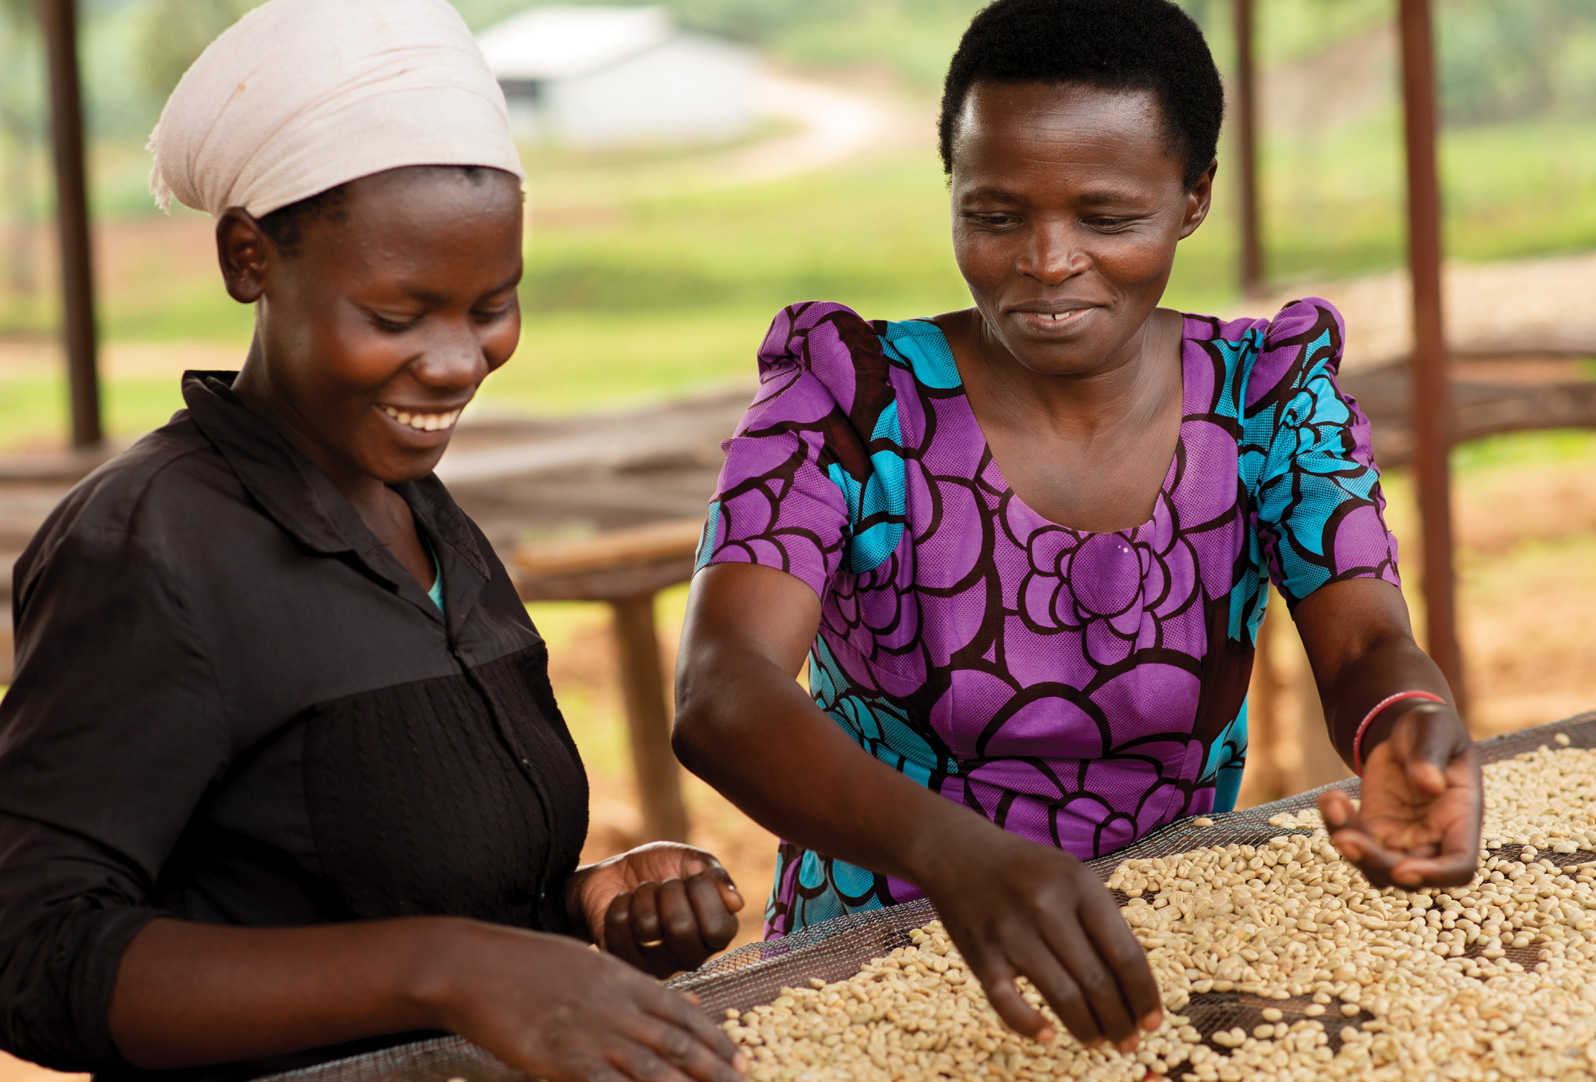 The Women’s Economic Development program works with governments, nonprofits, and the private sector to create opportunities for women that lead to economic independence. Women enrolled in the program, shown here, live and work in more than 120 countries around the world.